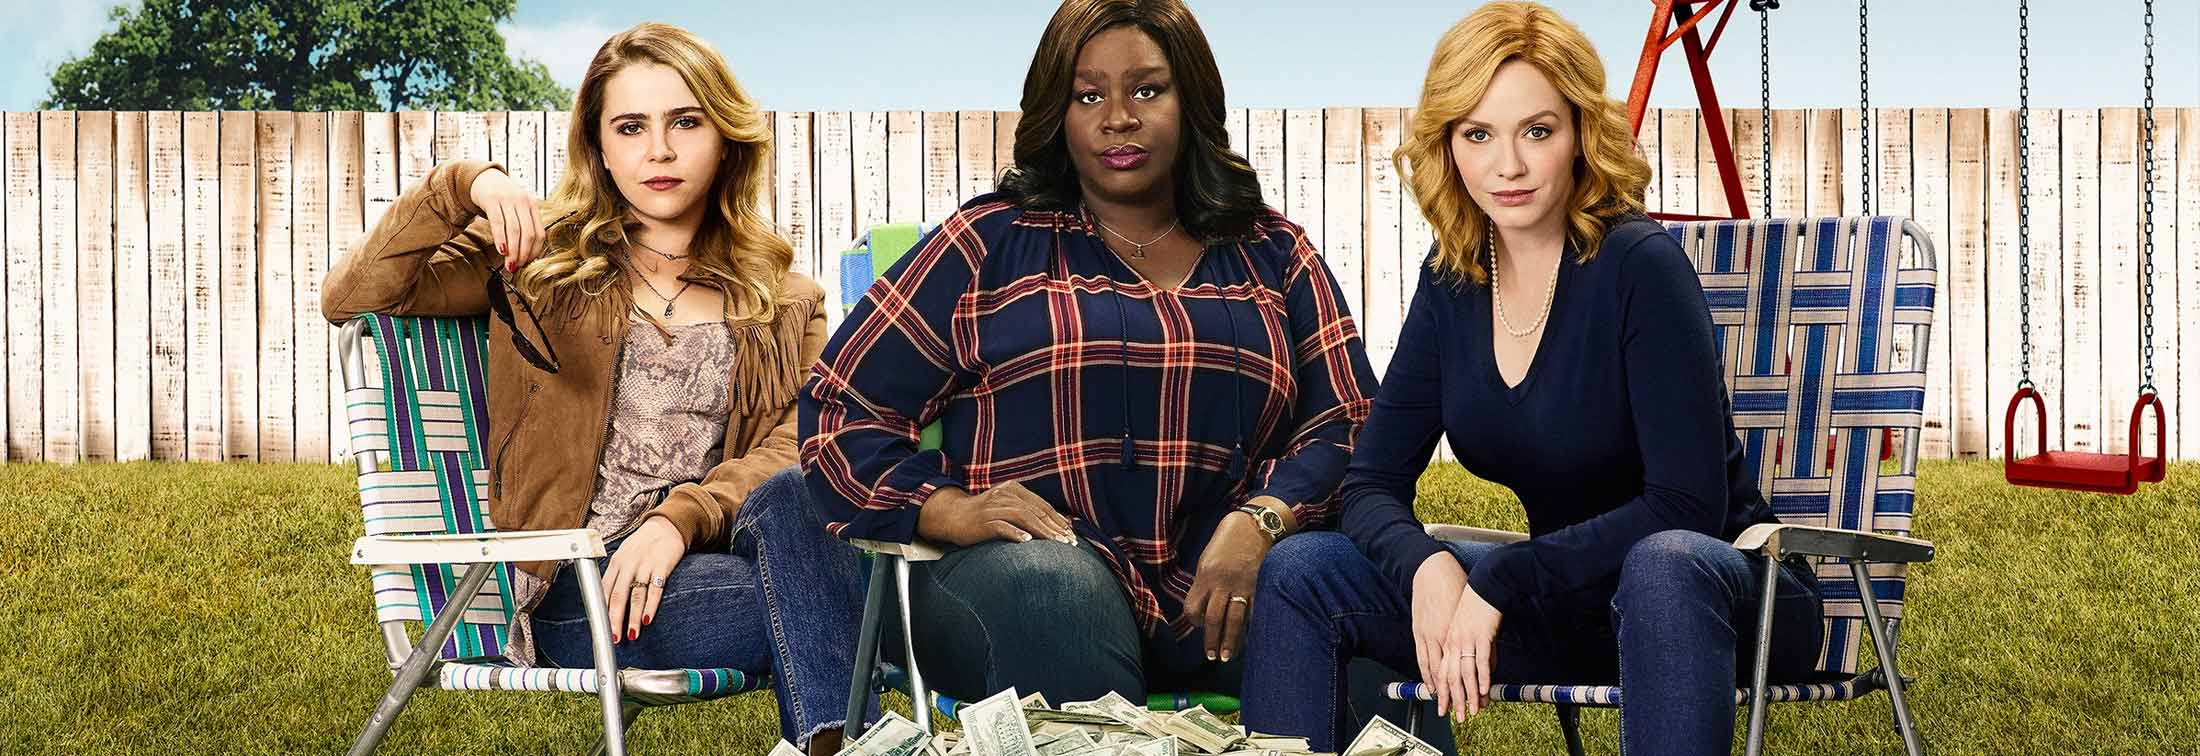 Good Girls: Season 2 - It's never been so good to be bad